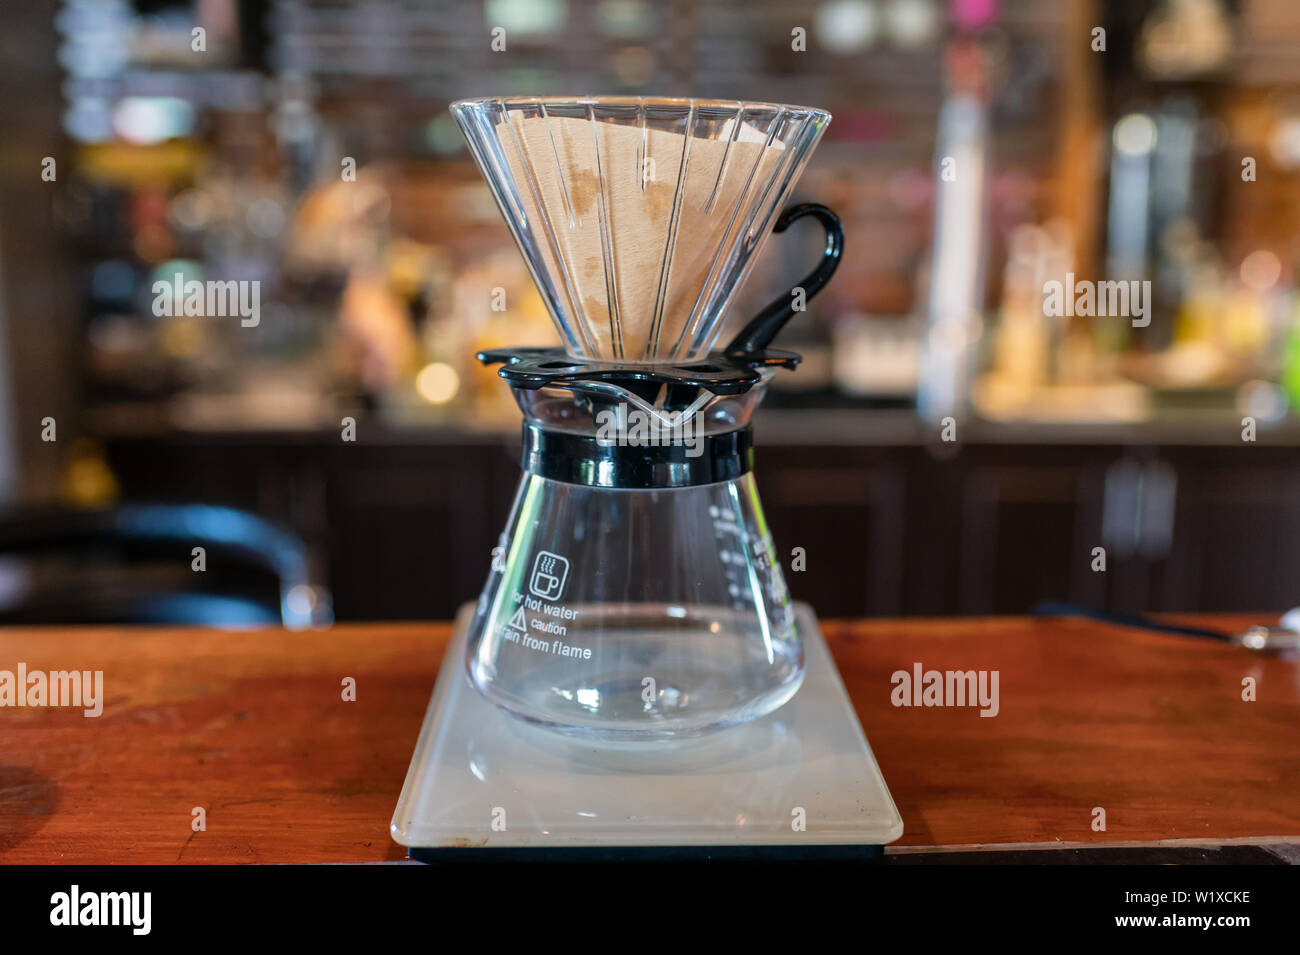 Measuring coffee drip with glass mug and paper filter on counter bar Stock Photo